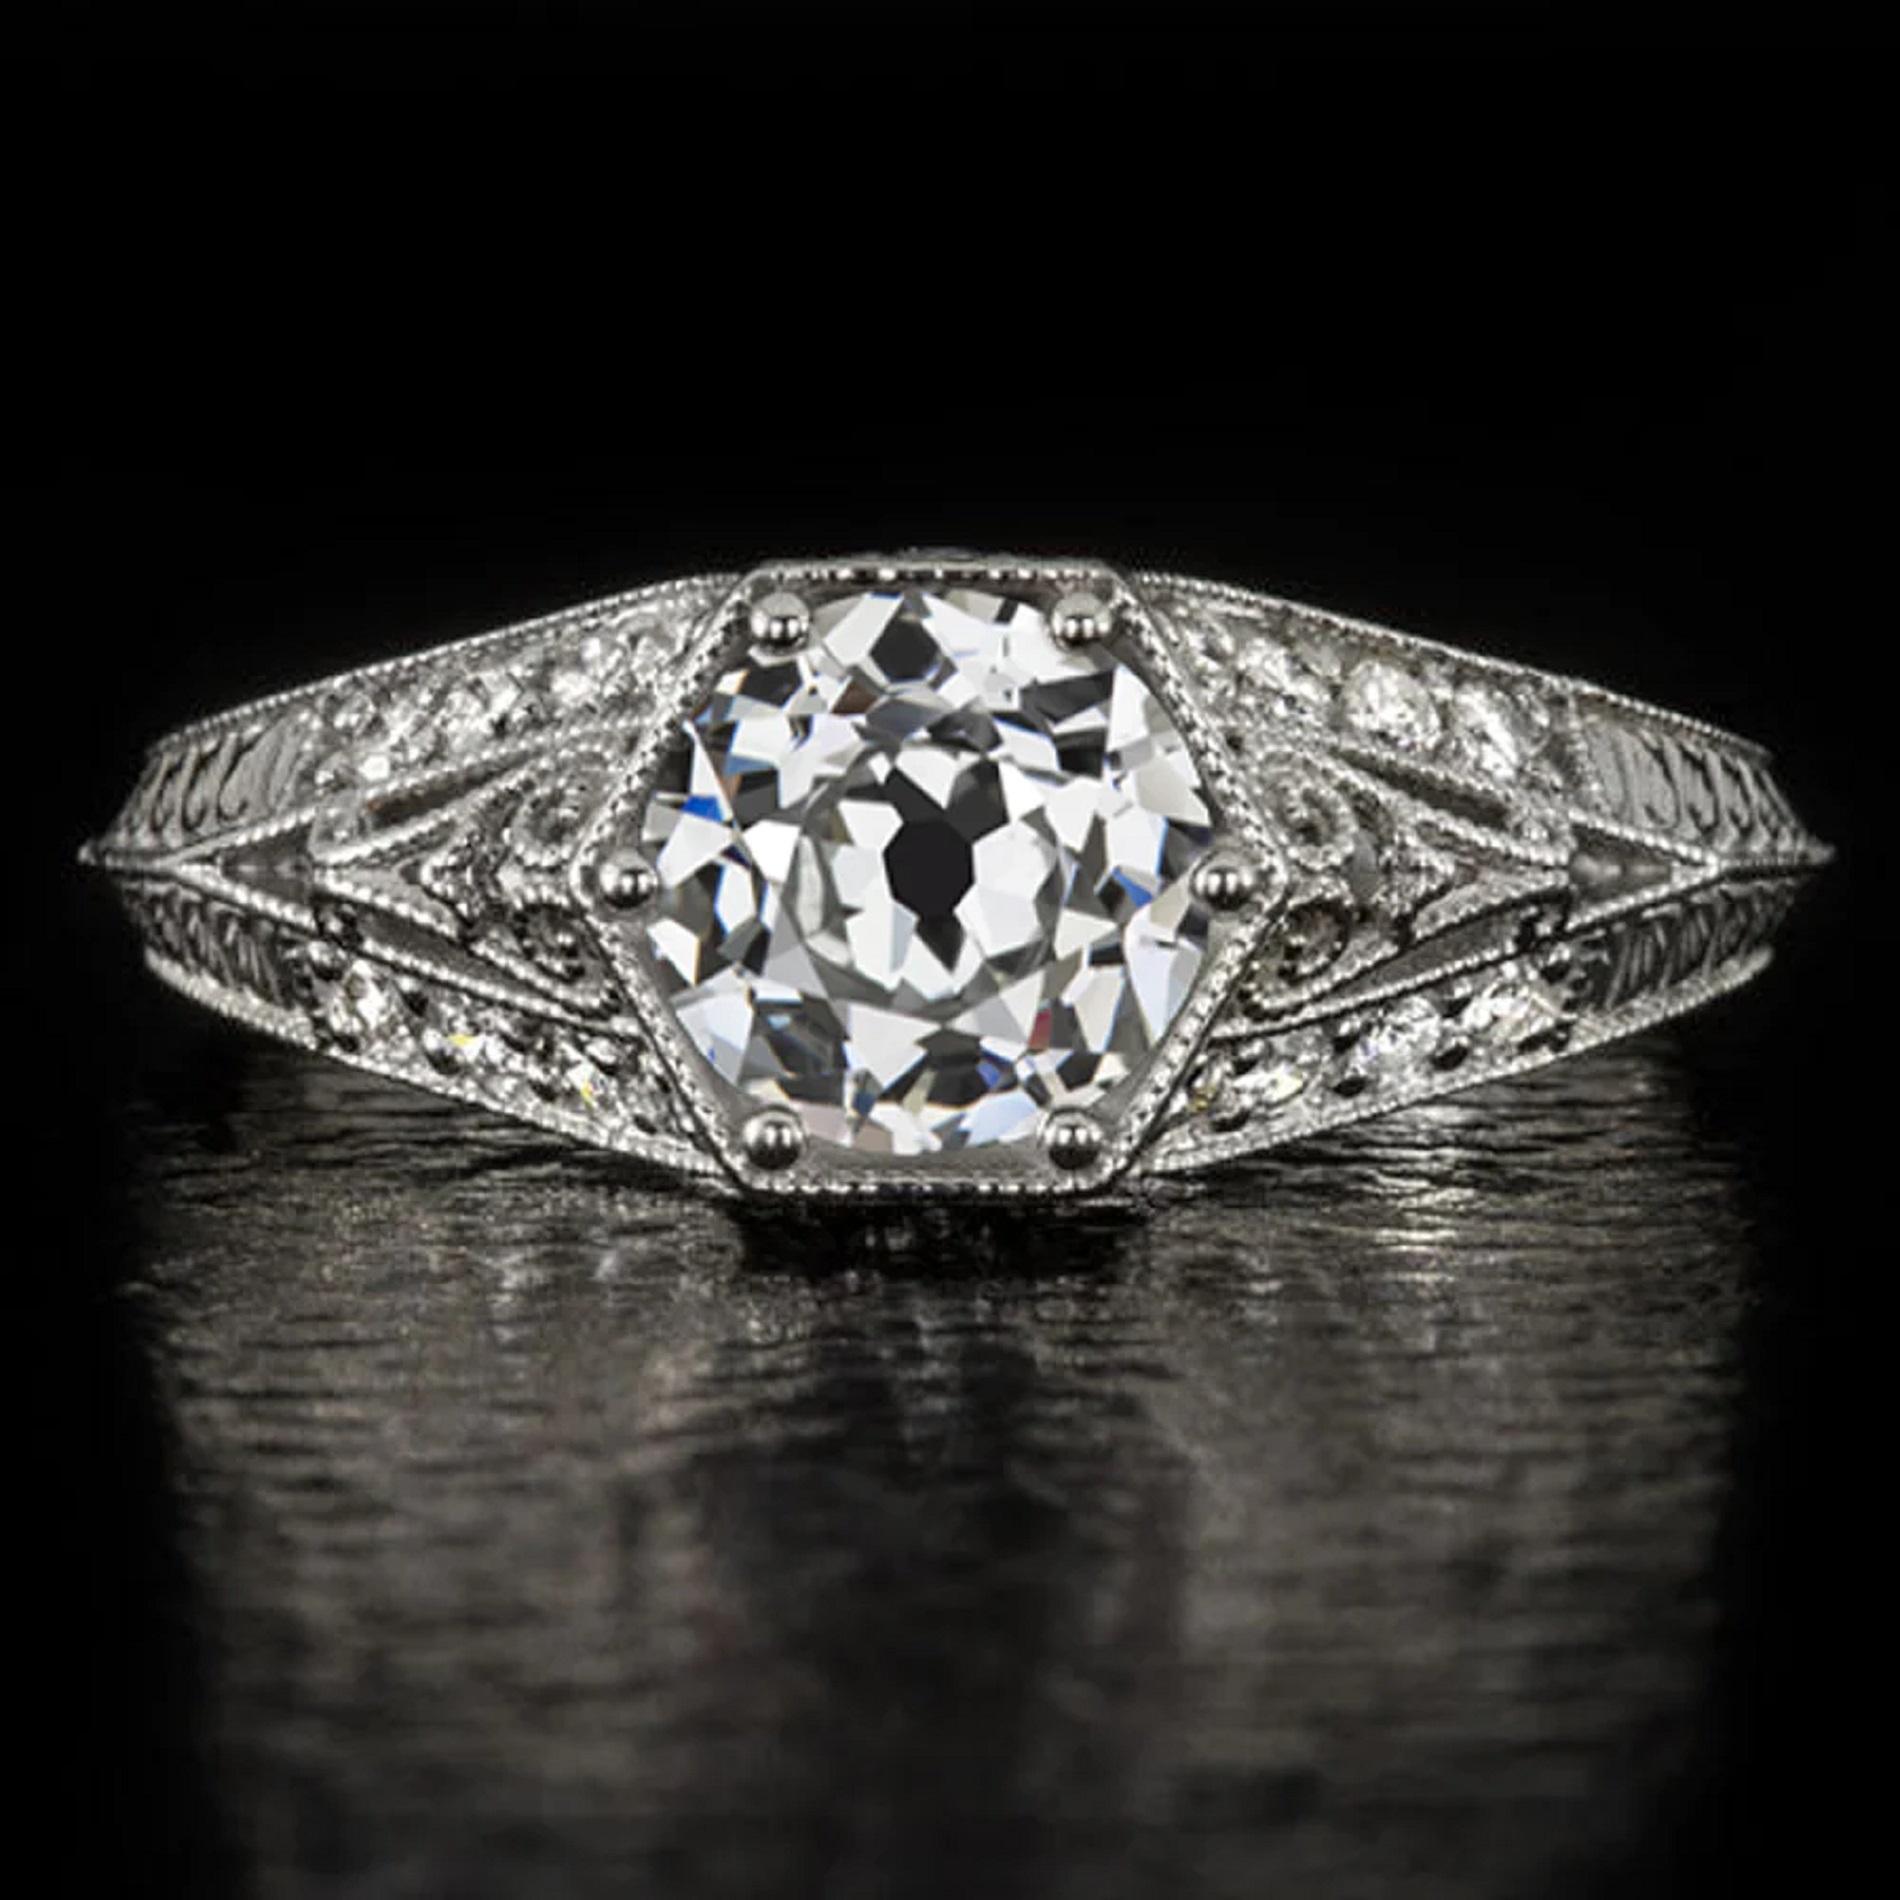 vintage style diamond ring is romantic and gorgeously detailed with filigree curls, engraved details, and glittering diamond accents! The 1.00ct old European cut center diamond is meaningfully historied and gorgeously brilliant!

Highlights:

-